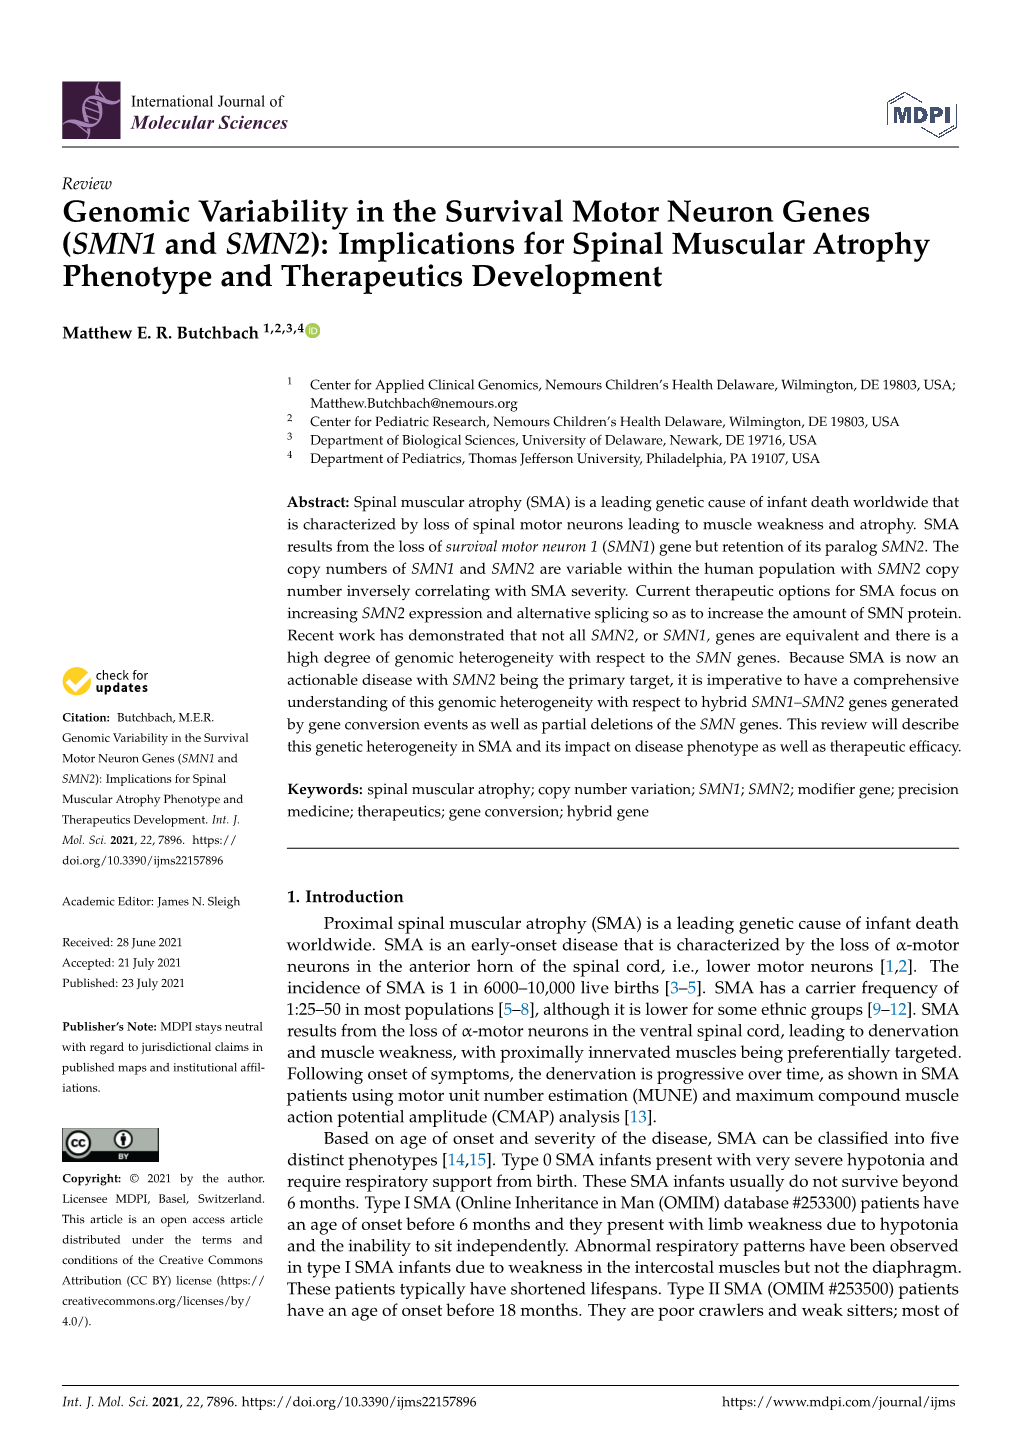 Genomic Variability in the Survival Motor Neuron Genes (SMN1 and SMN2): Implications for Spinal Muscular Atrophy Phenotype and Therapeutics Development